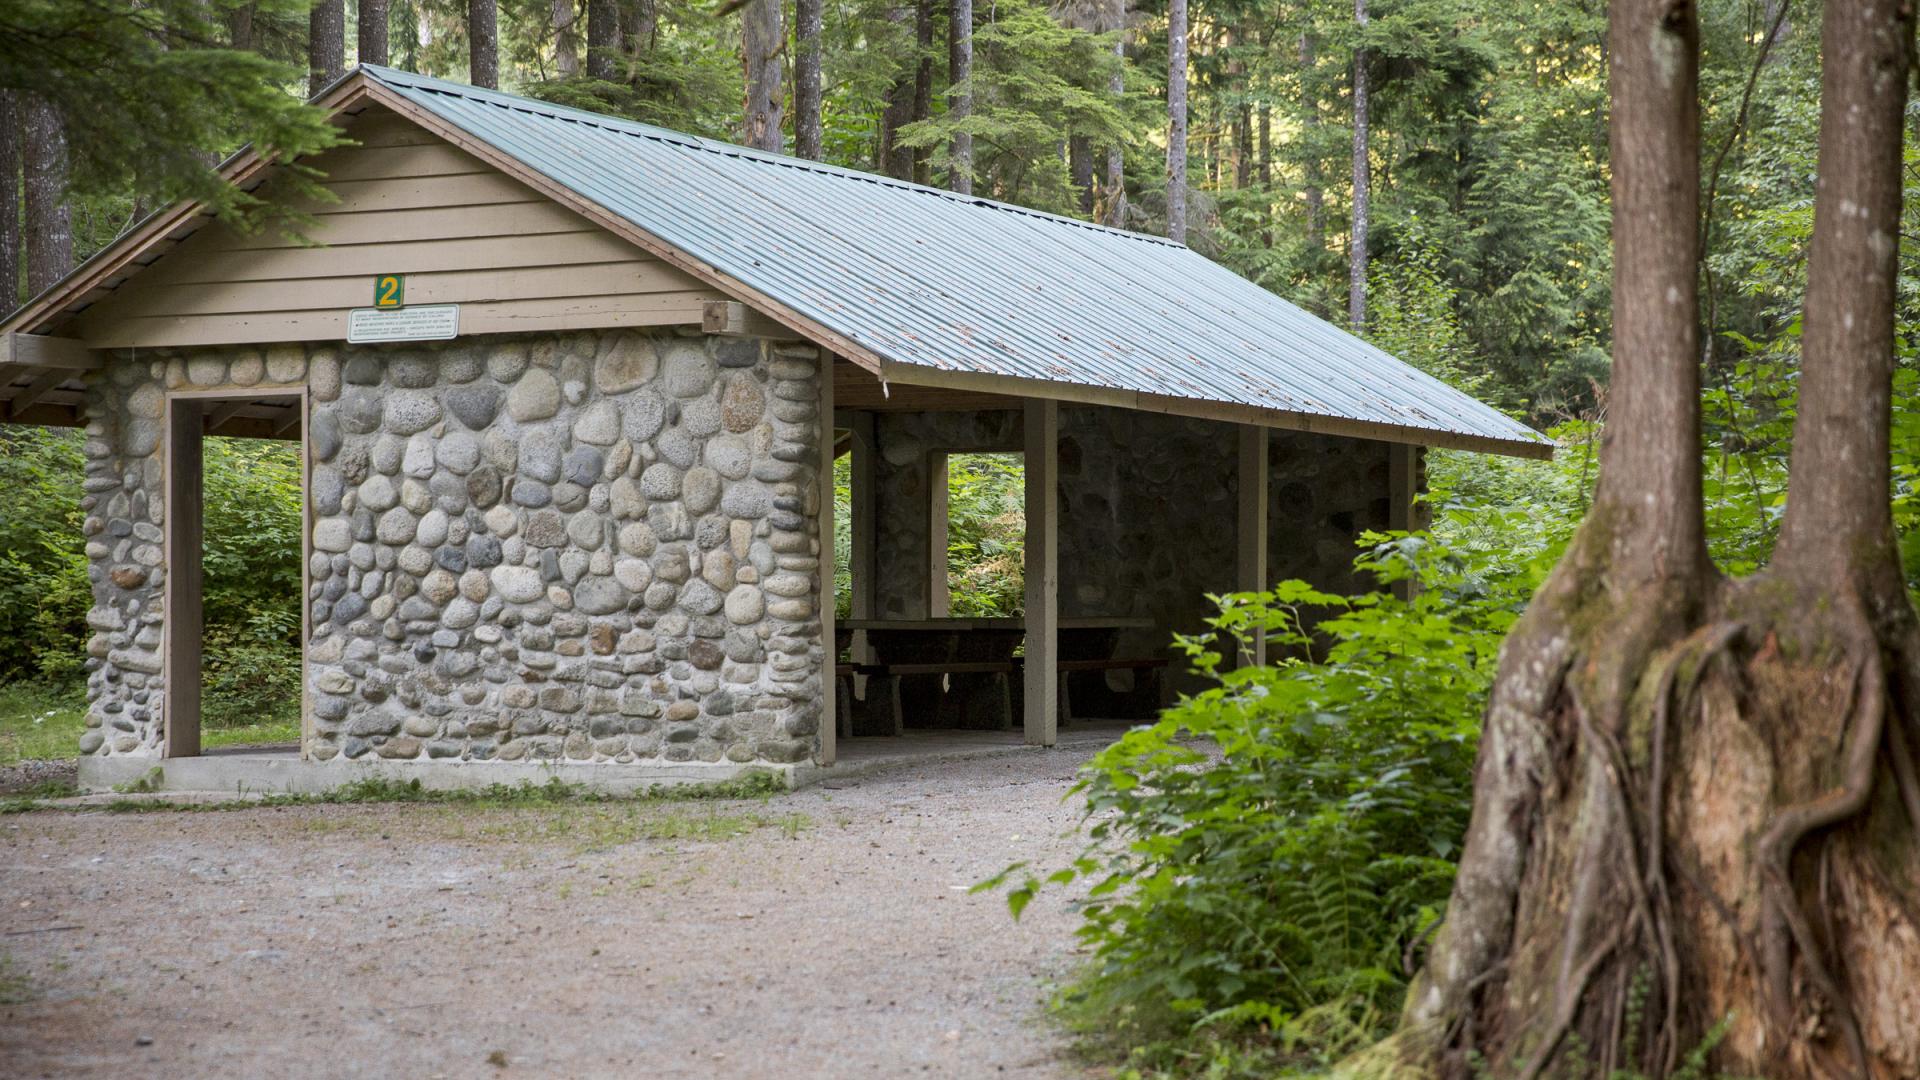 A picnic shelter with a stone accent wall is surrounded by the trees of the forest.